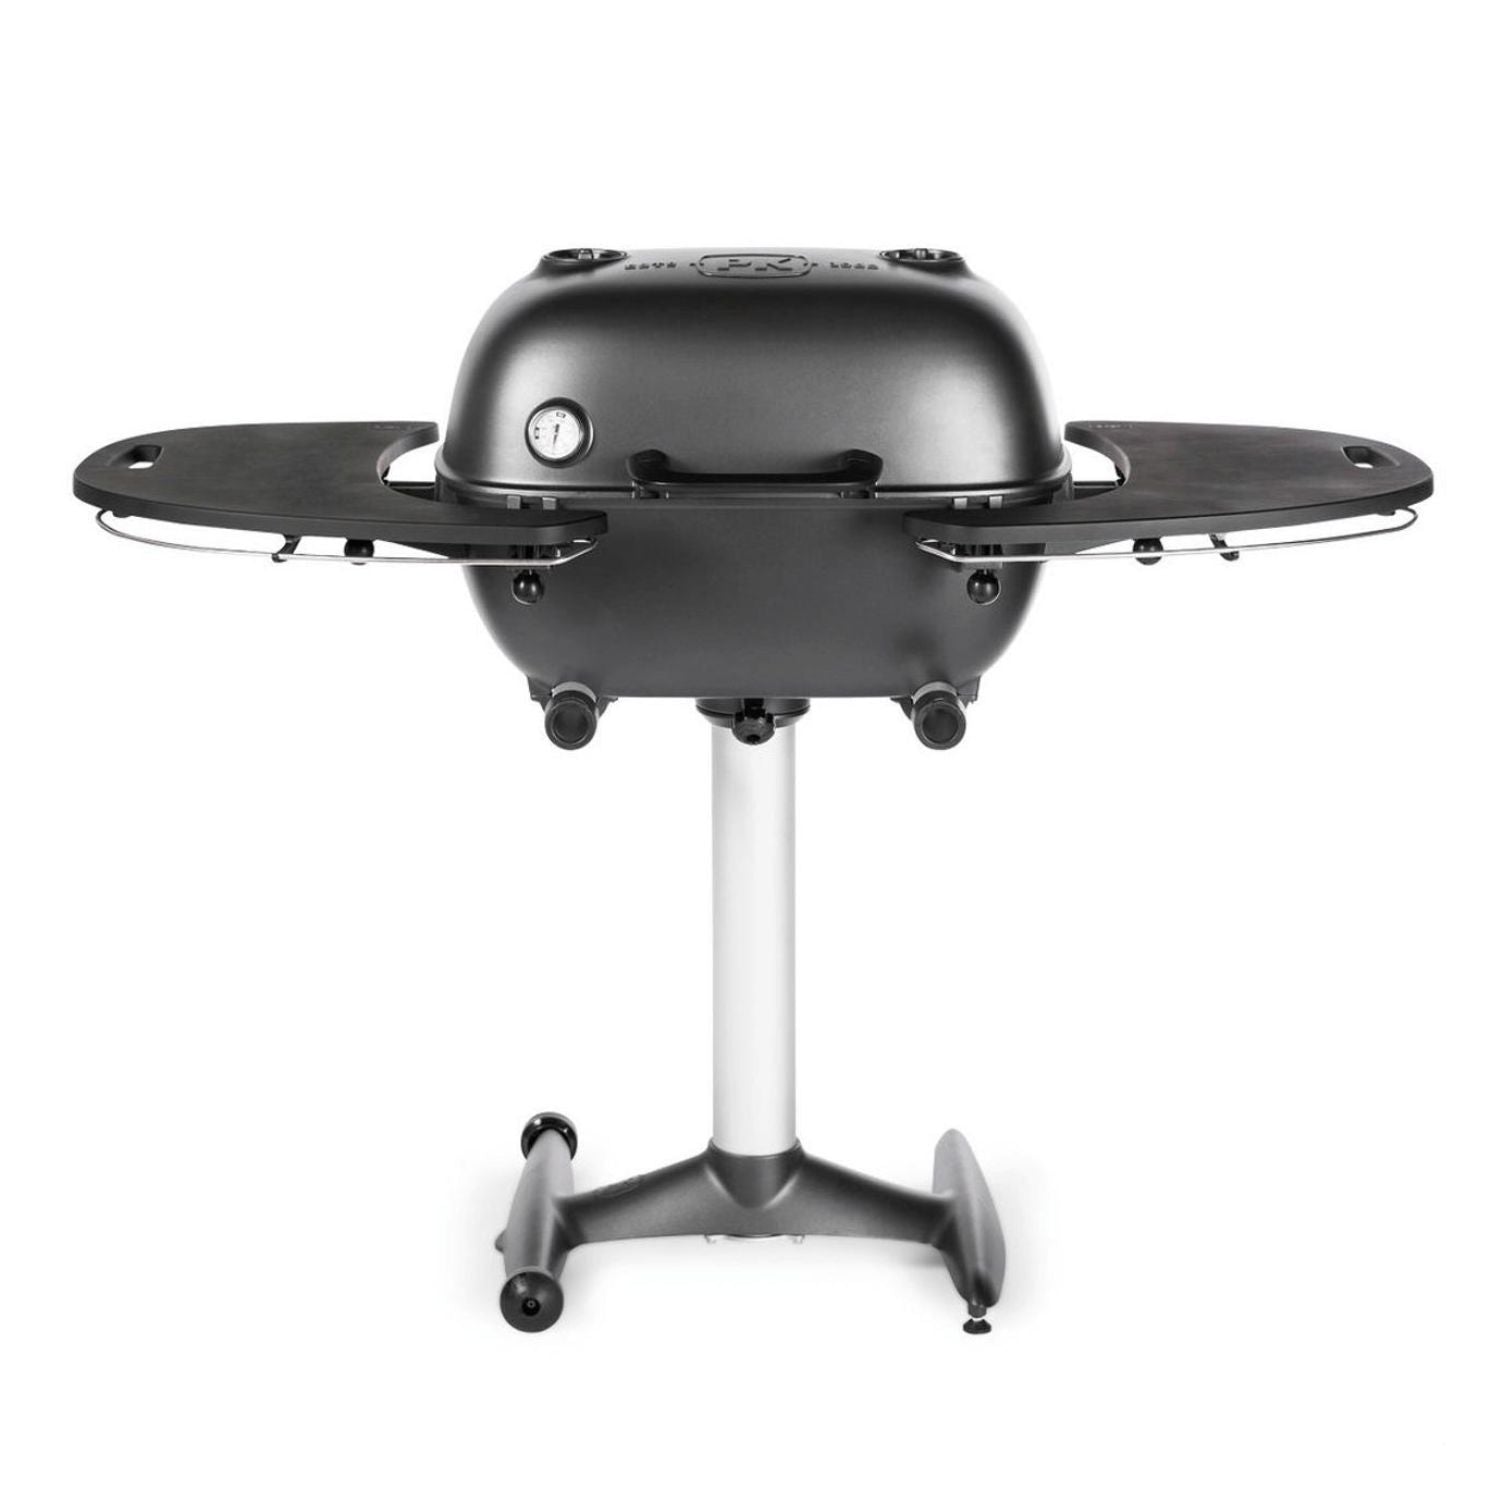 PK Grills PK360 Charcoal Grill, Graphite 12043442